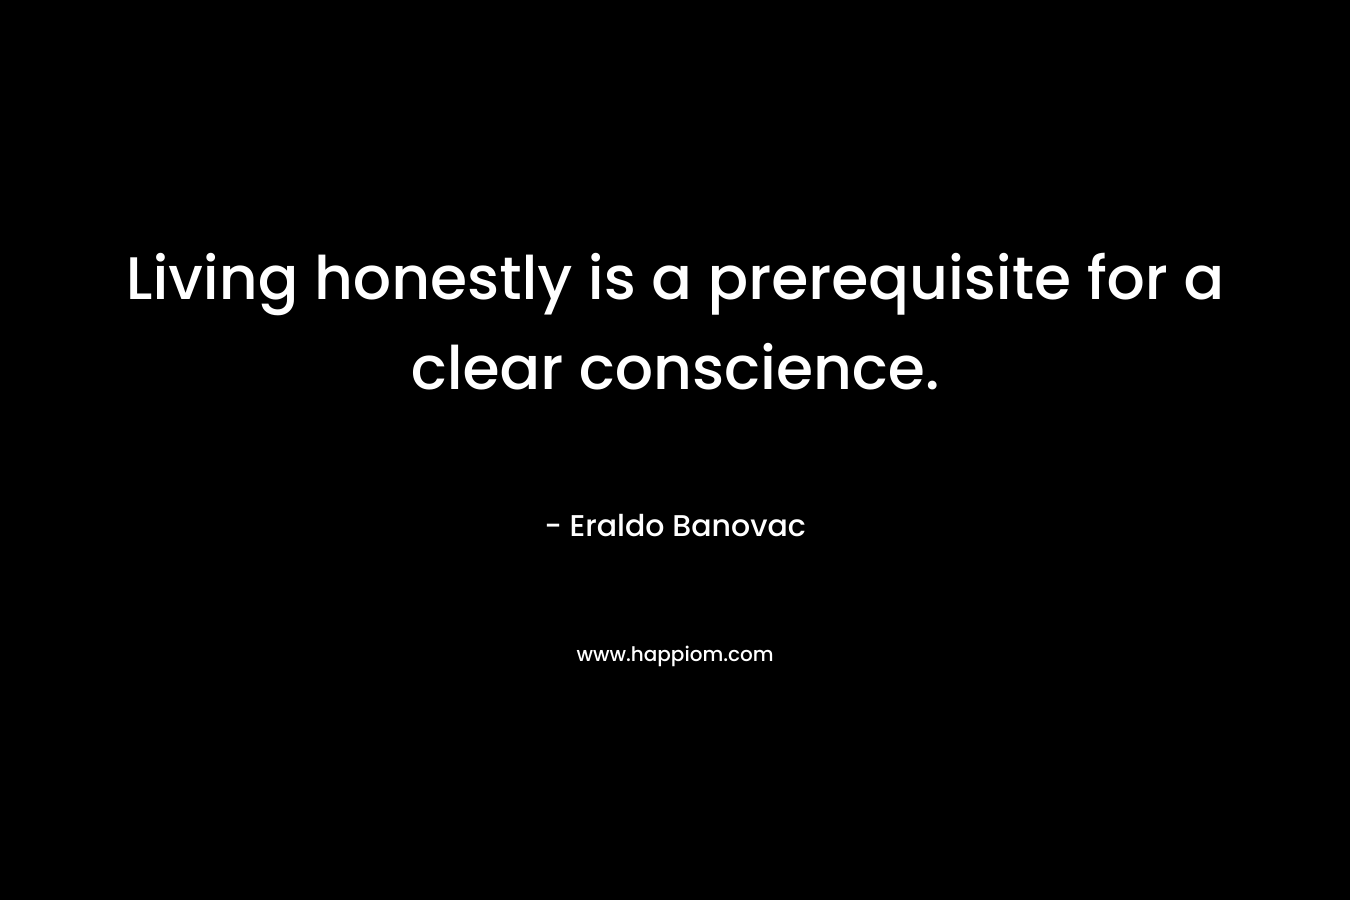 Living honestly is a prerequisite for a clear conscience.